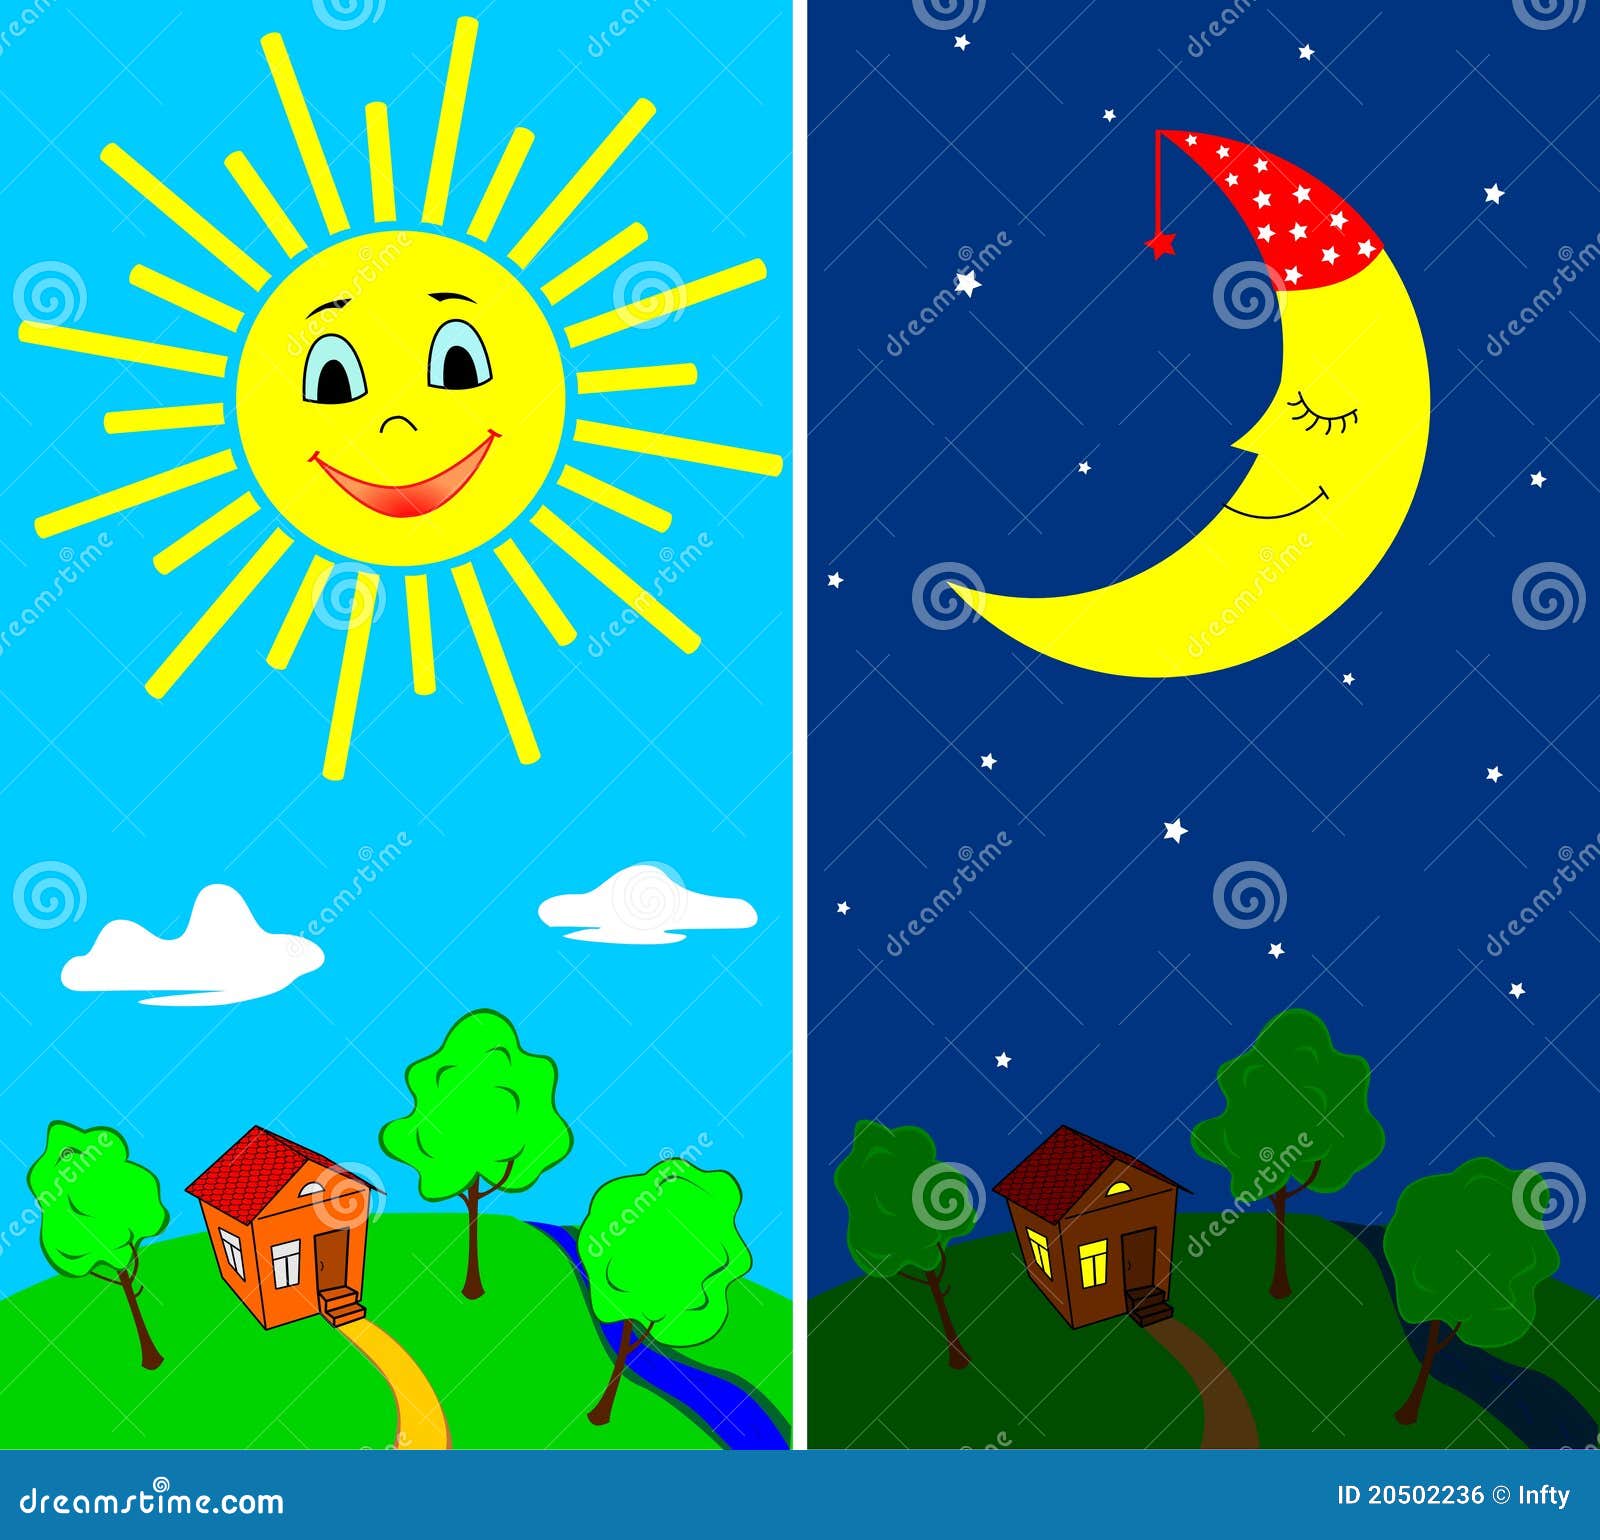 clipart of night time - photo #34